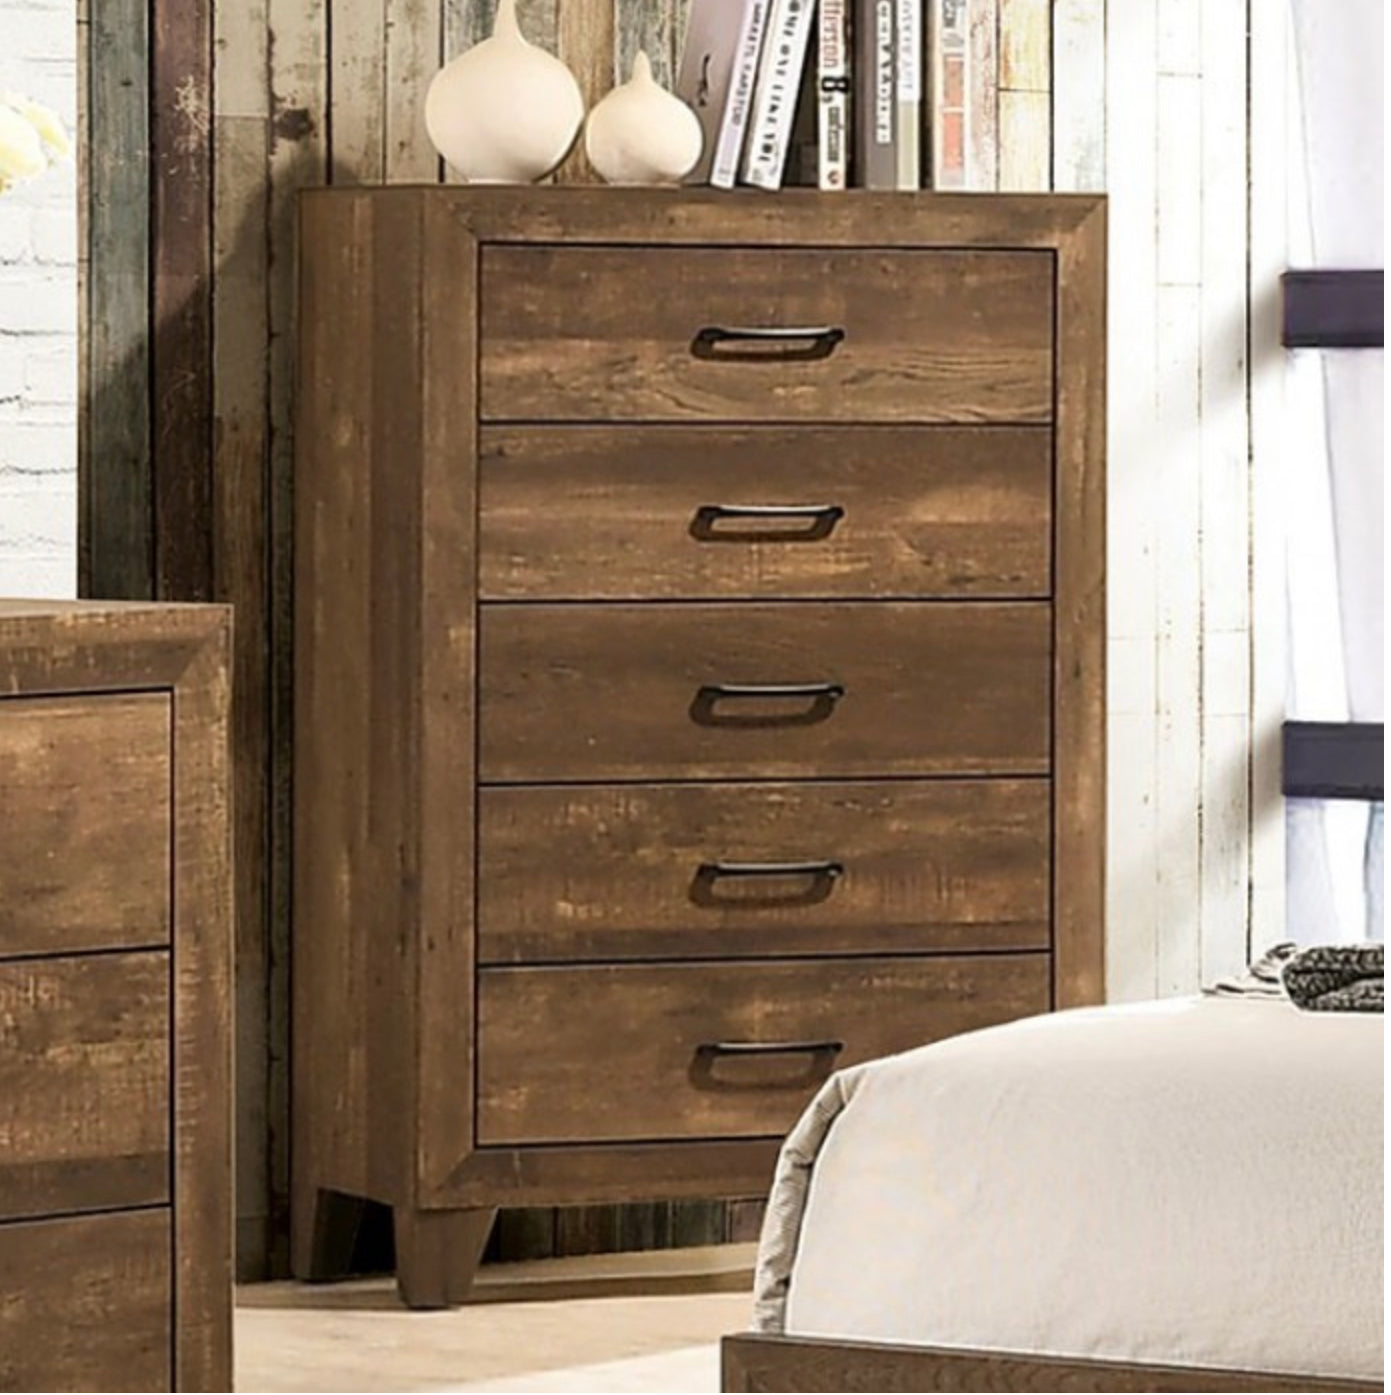 Cooper Rustic Chest of Drawers